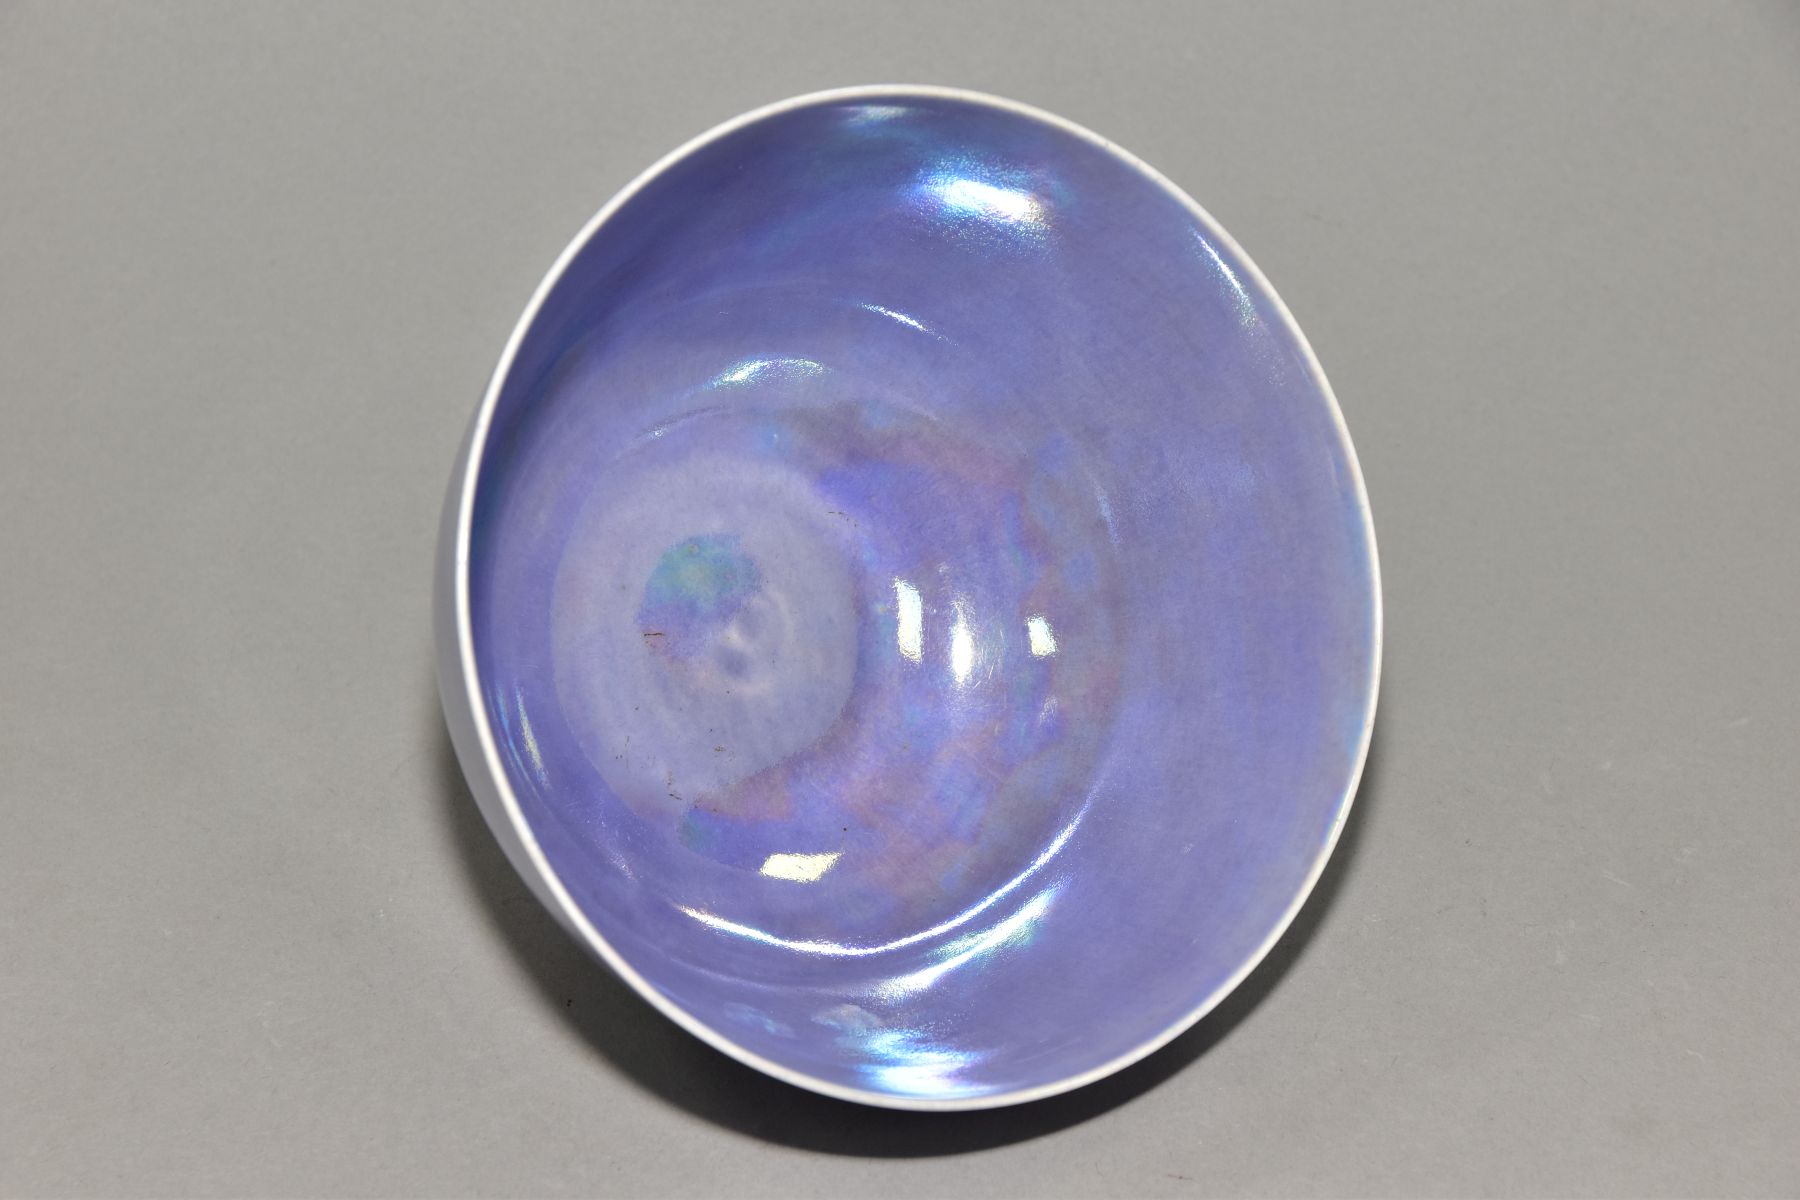 RUSKIN POTTERY, a footed eggshell bowl, covered in a lavender lustre glaze, impressed Ruskin England - Image 3 of 5